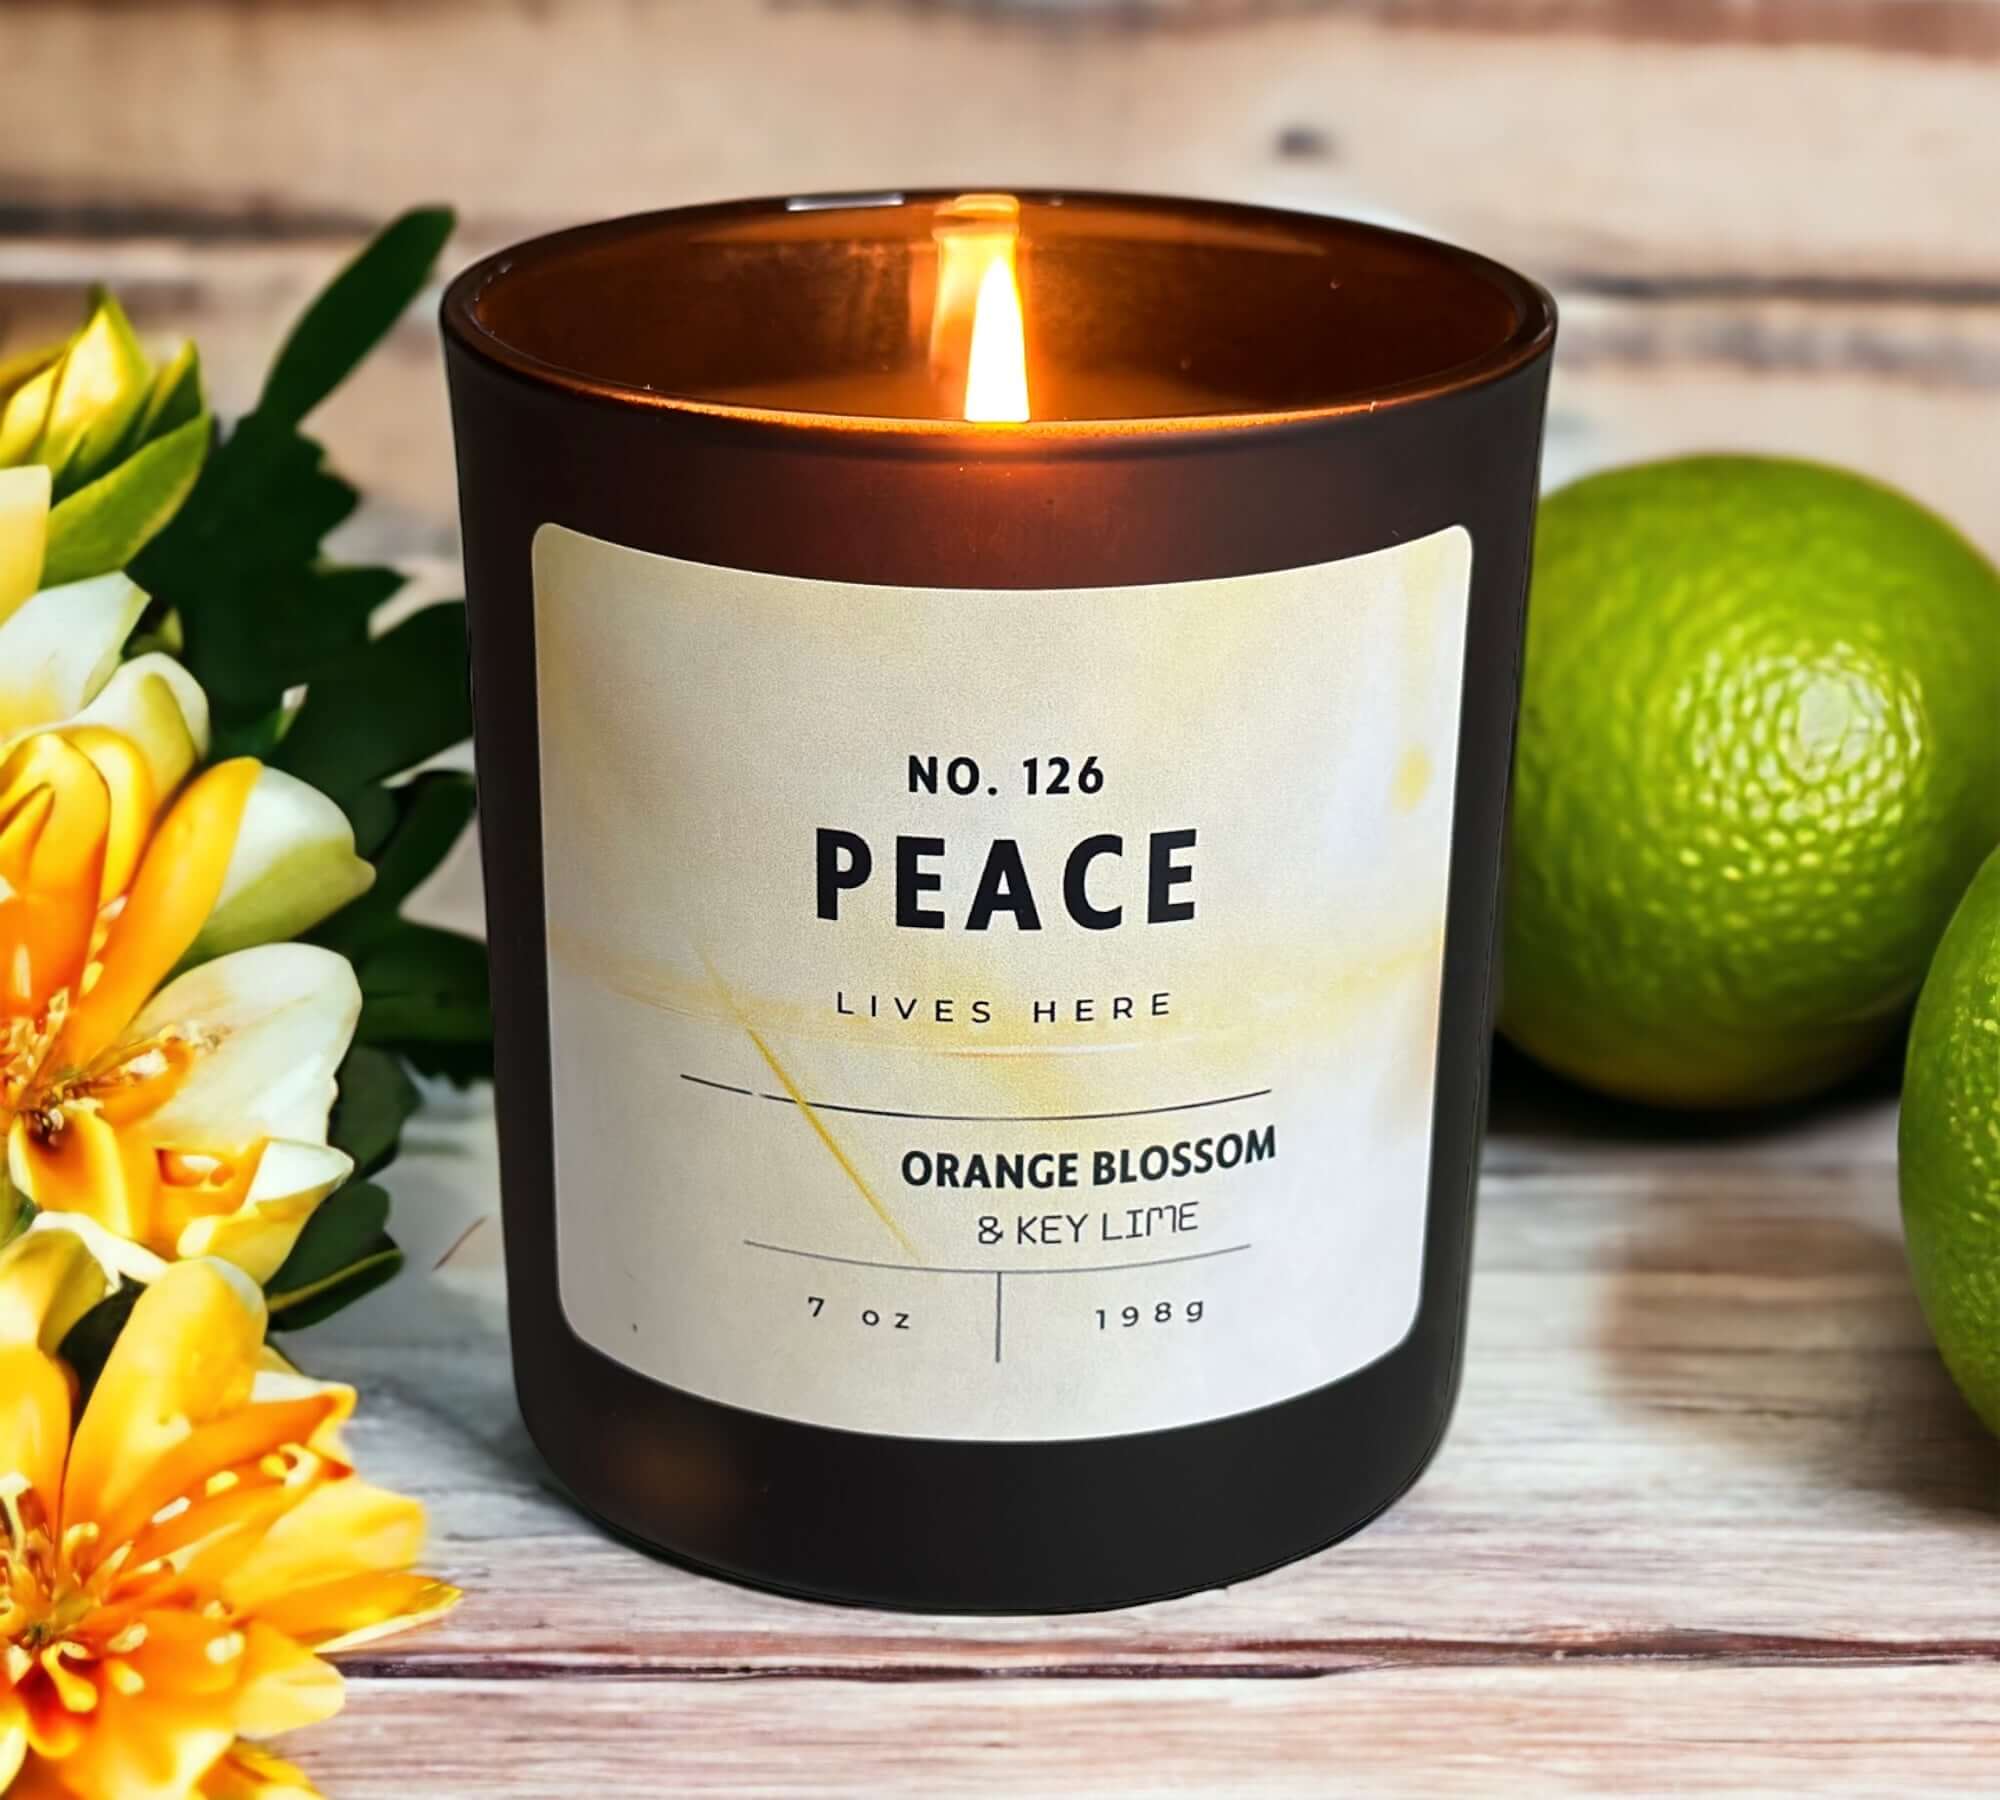 Peace lives here candle. Orange blossom and key lime candle